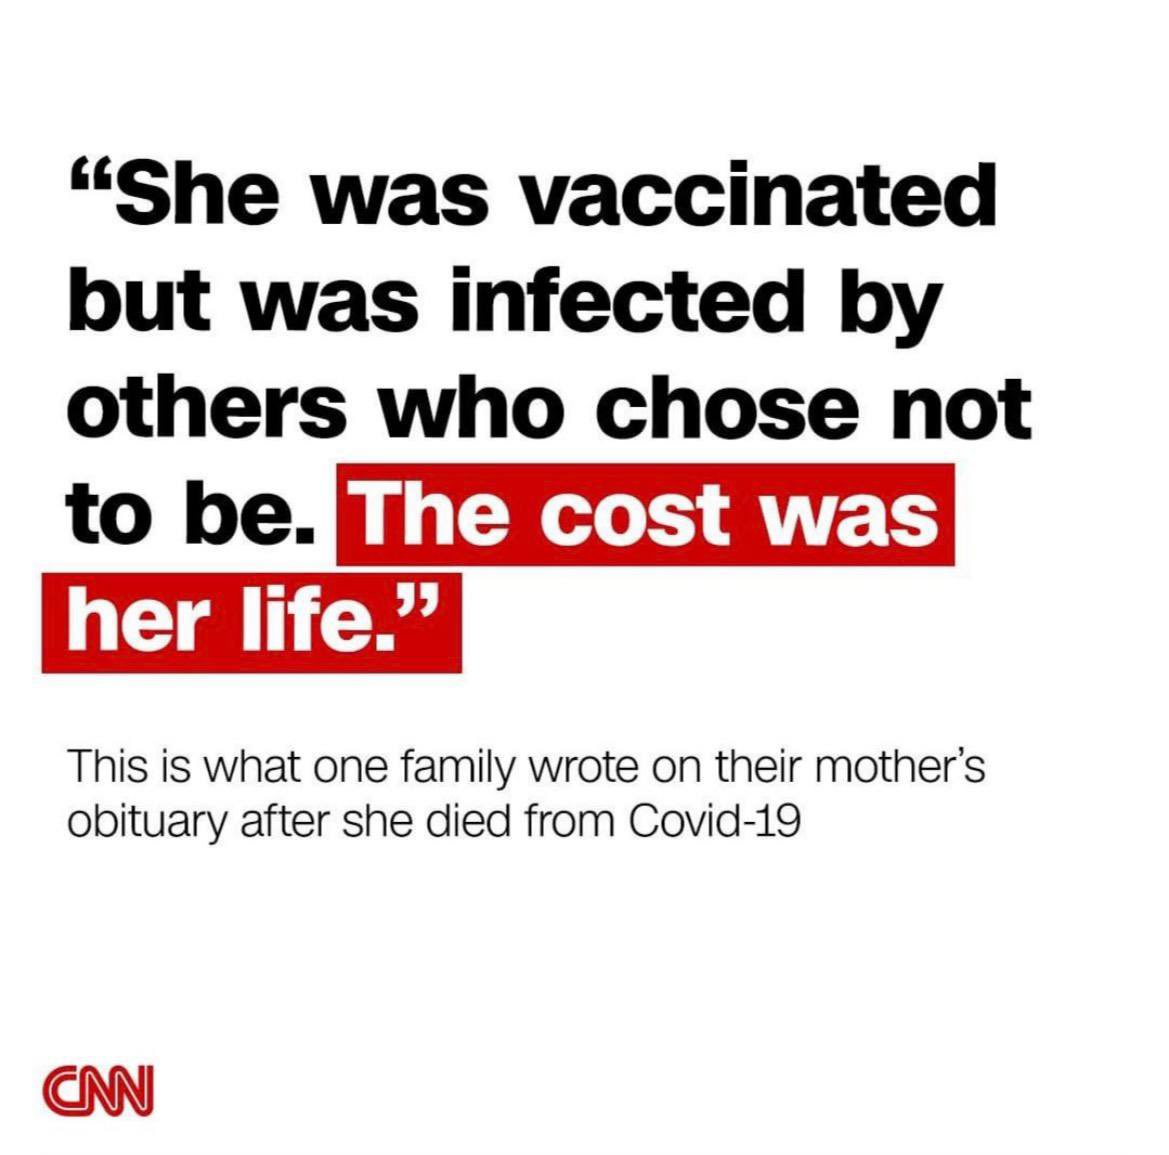 Soooooo...

Vaccines don't work then?

Isn't that what we've been saying all along?